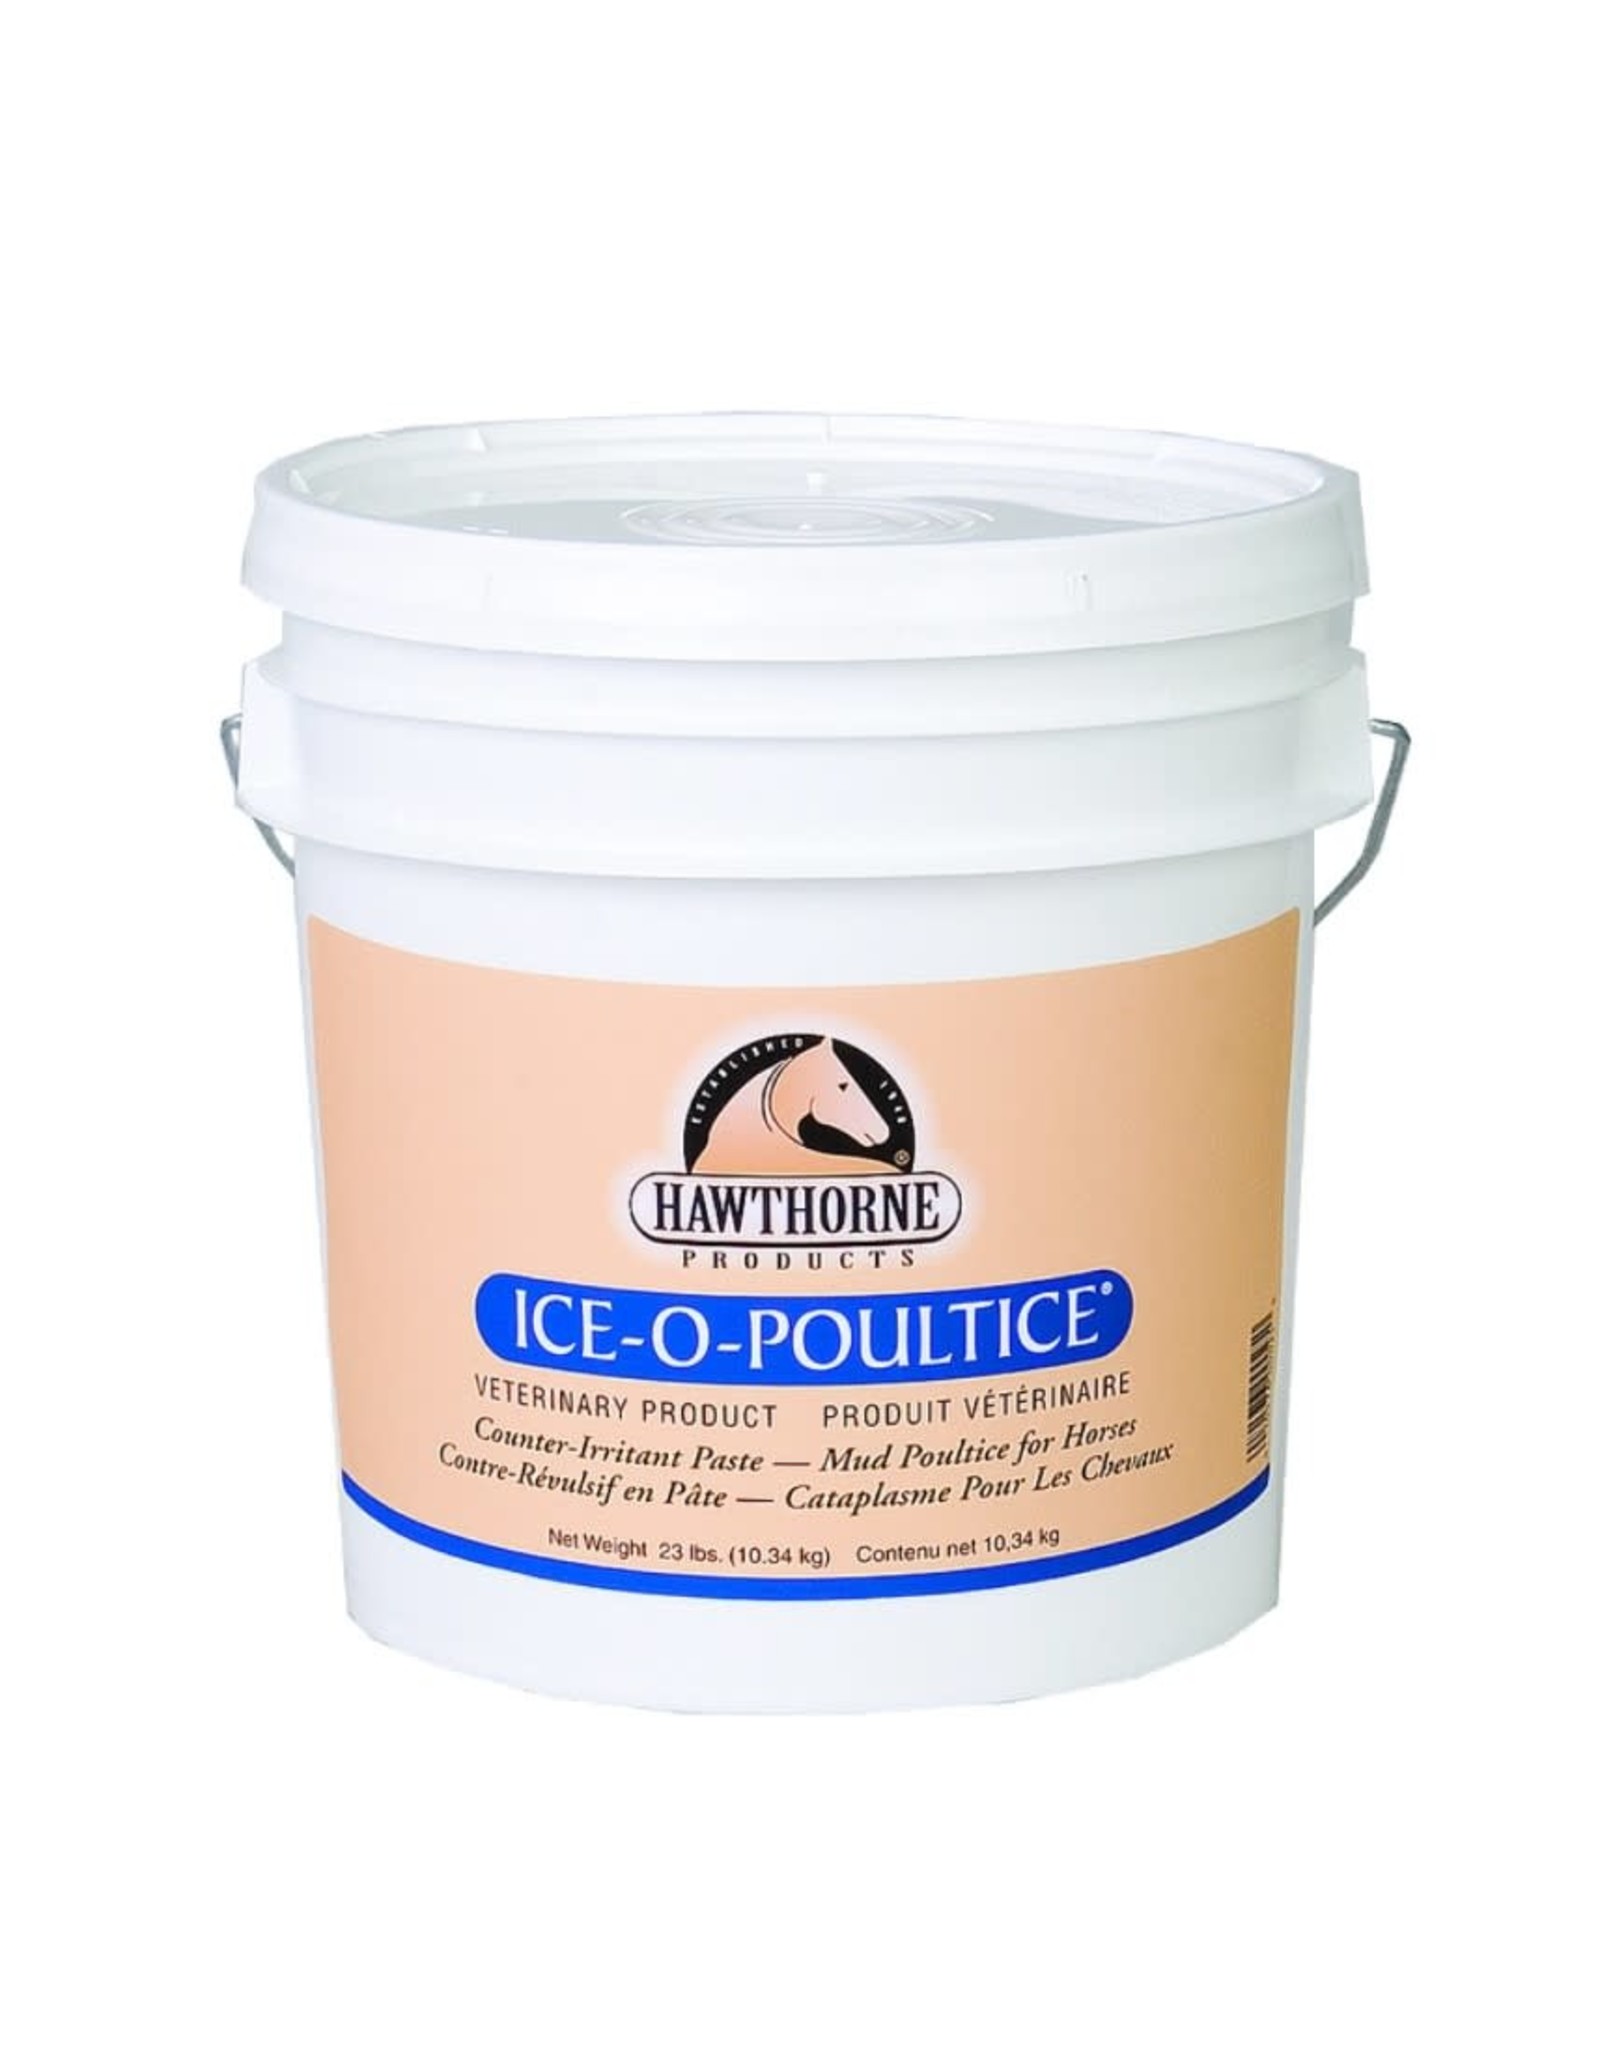 Hawthorne Ice-O-Poultice